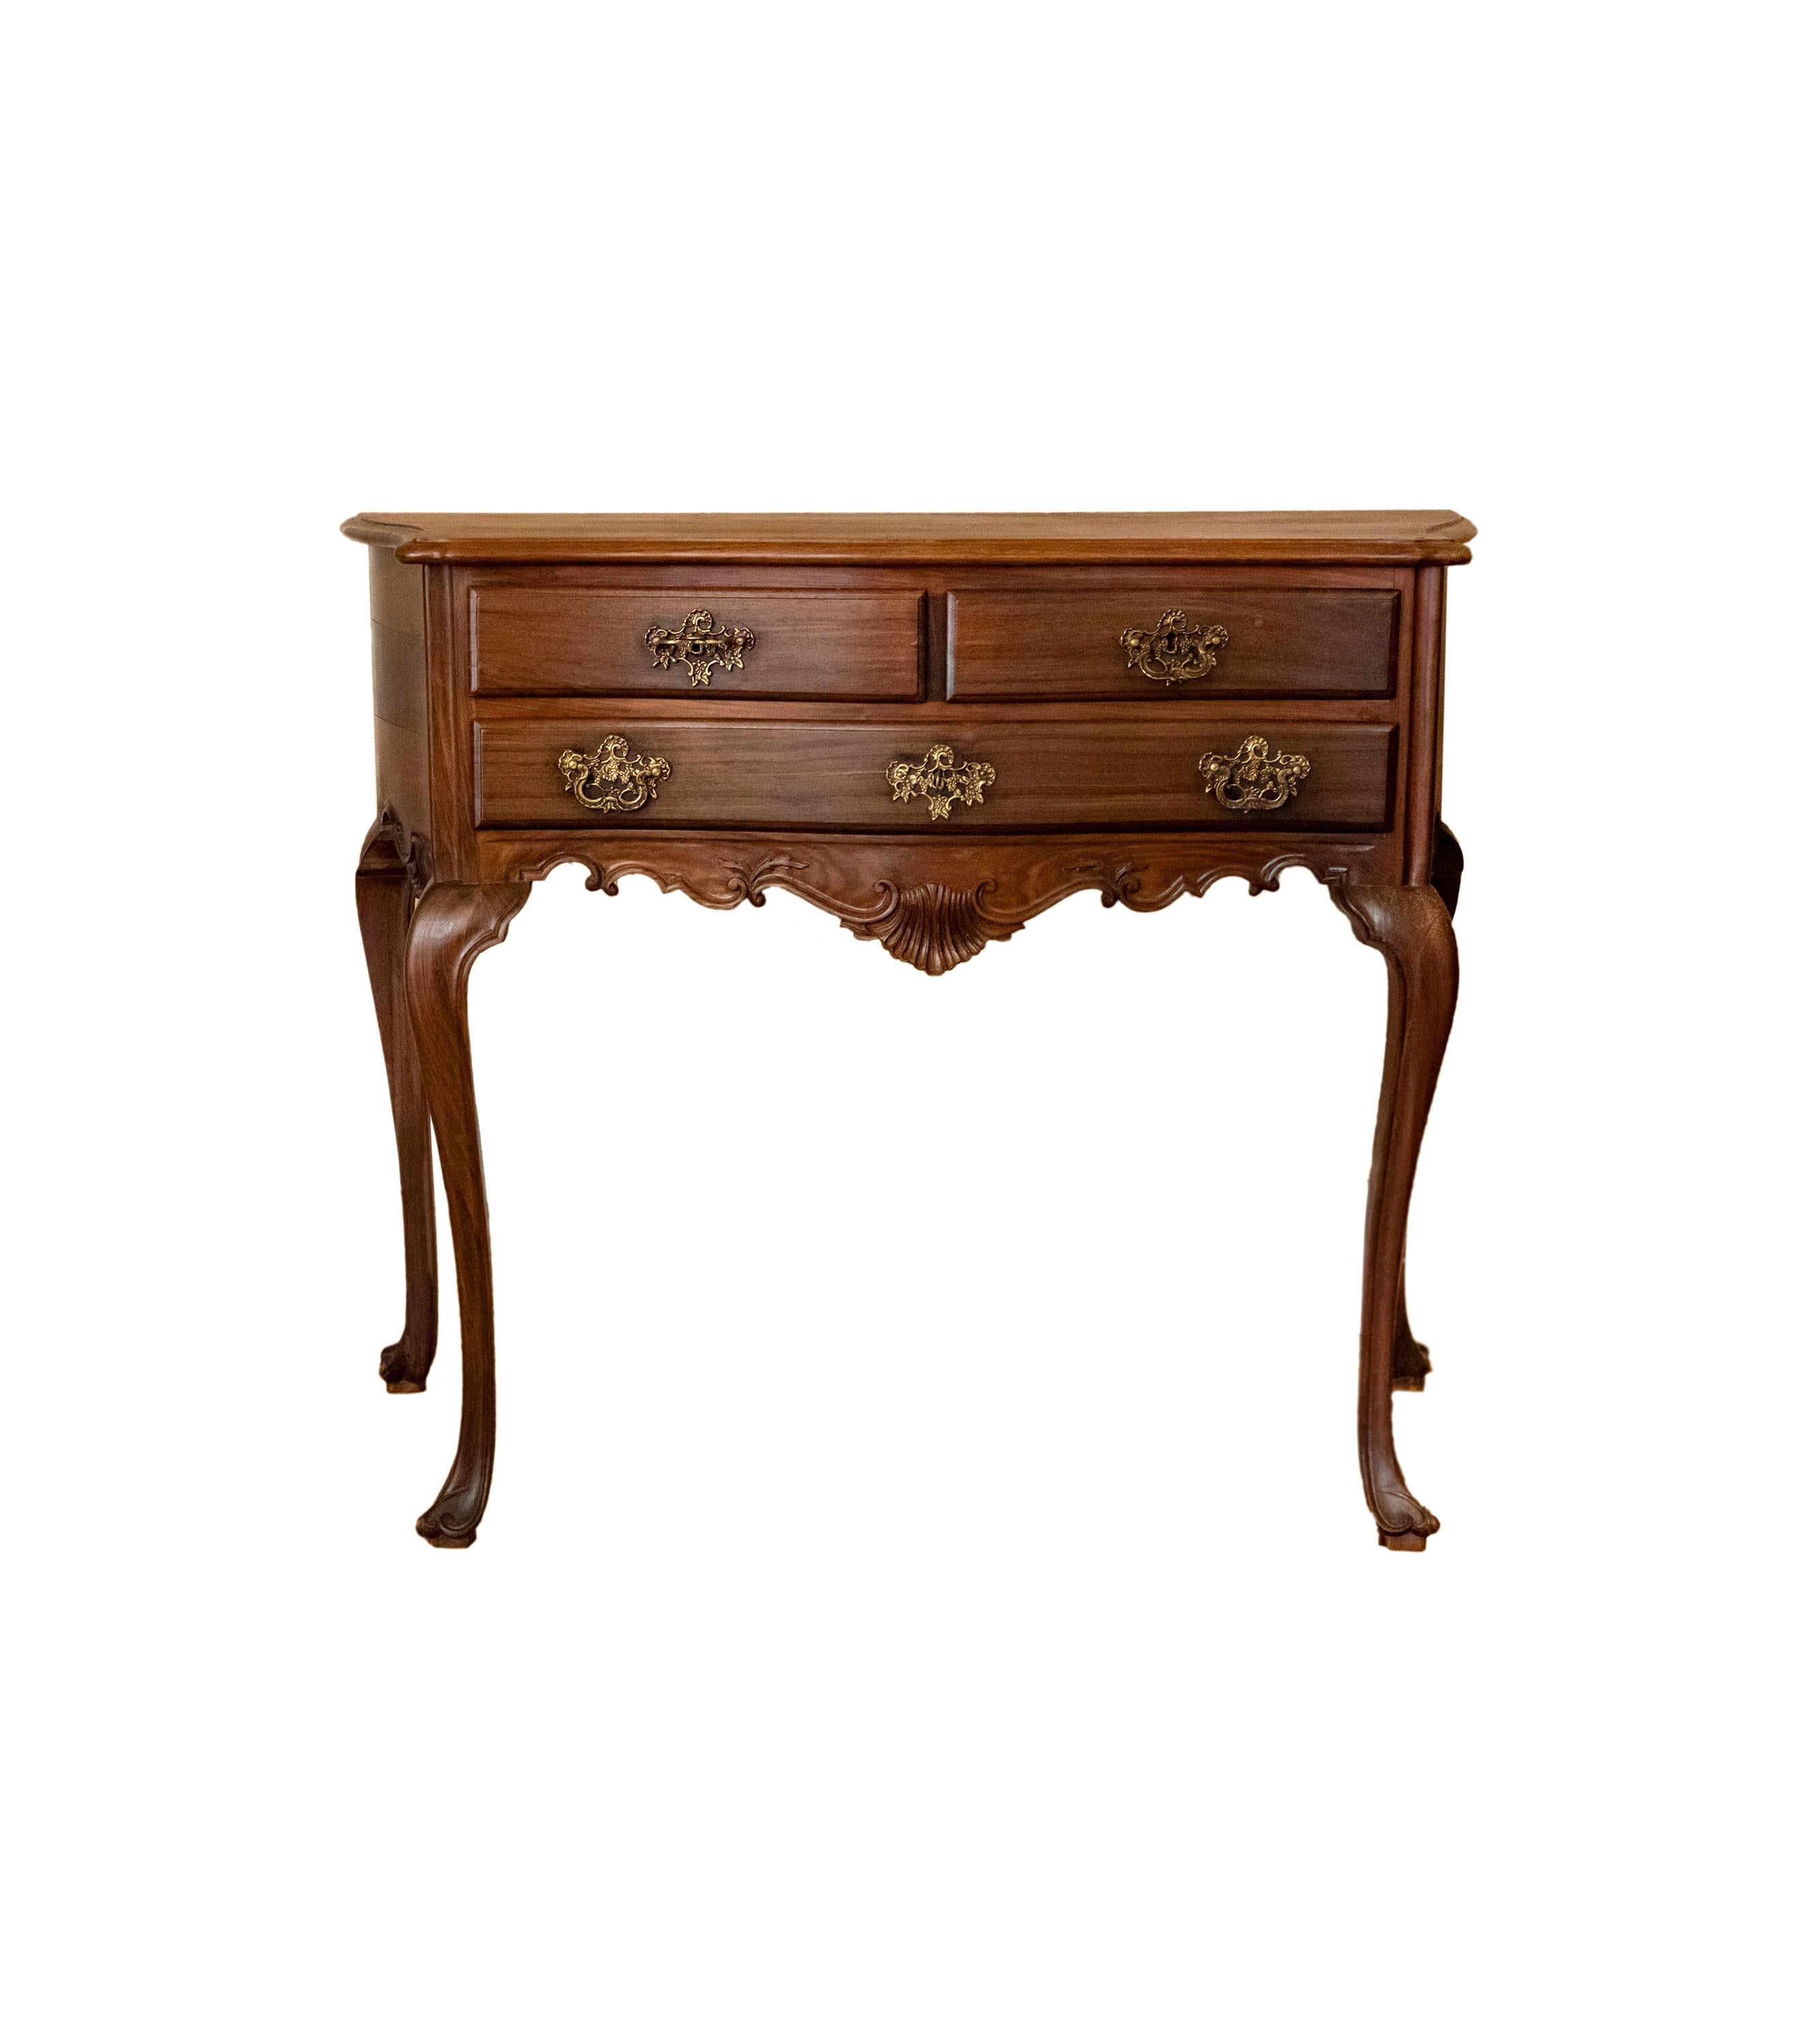 A Portuguese baroque style table commode with two drawers, vegetative marquetry skirt and bombée legs, three drawer and gilded hardware